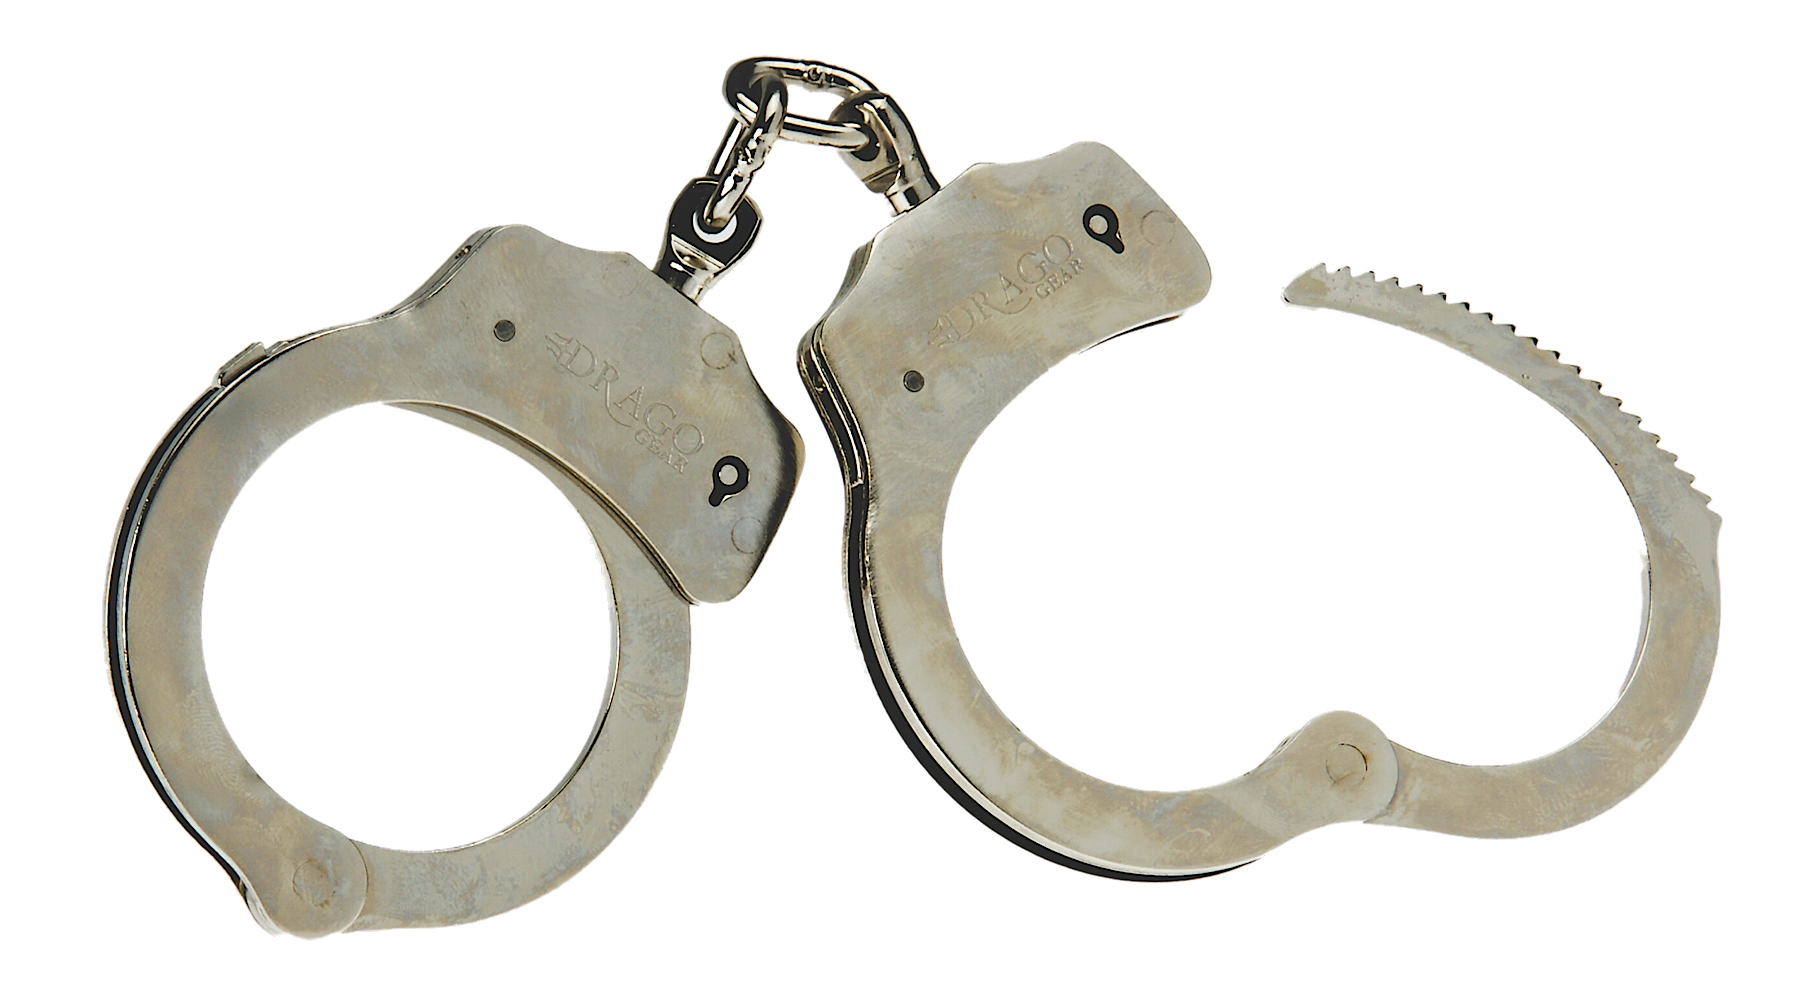 Opened png image purepng. Handcuffs clipart handcuff key